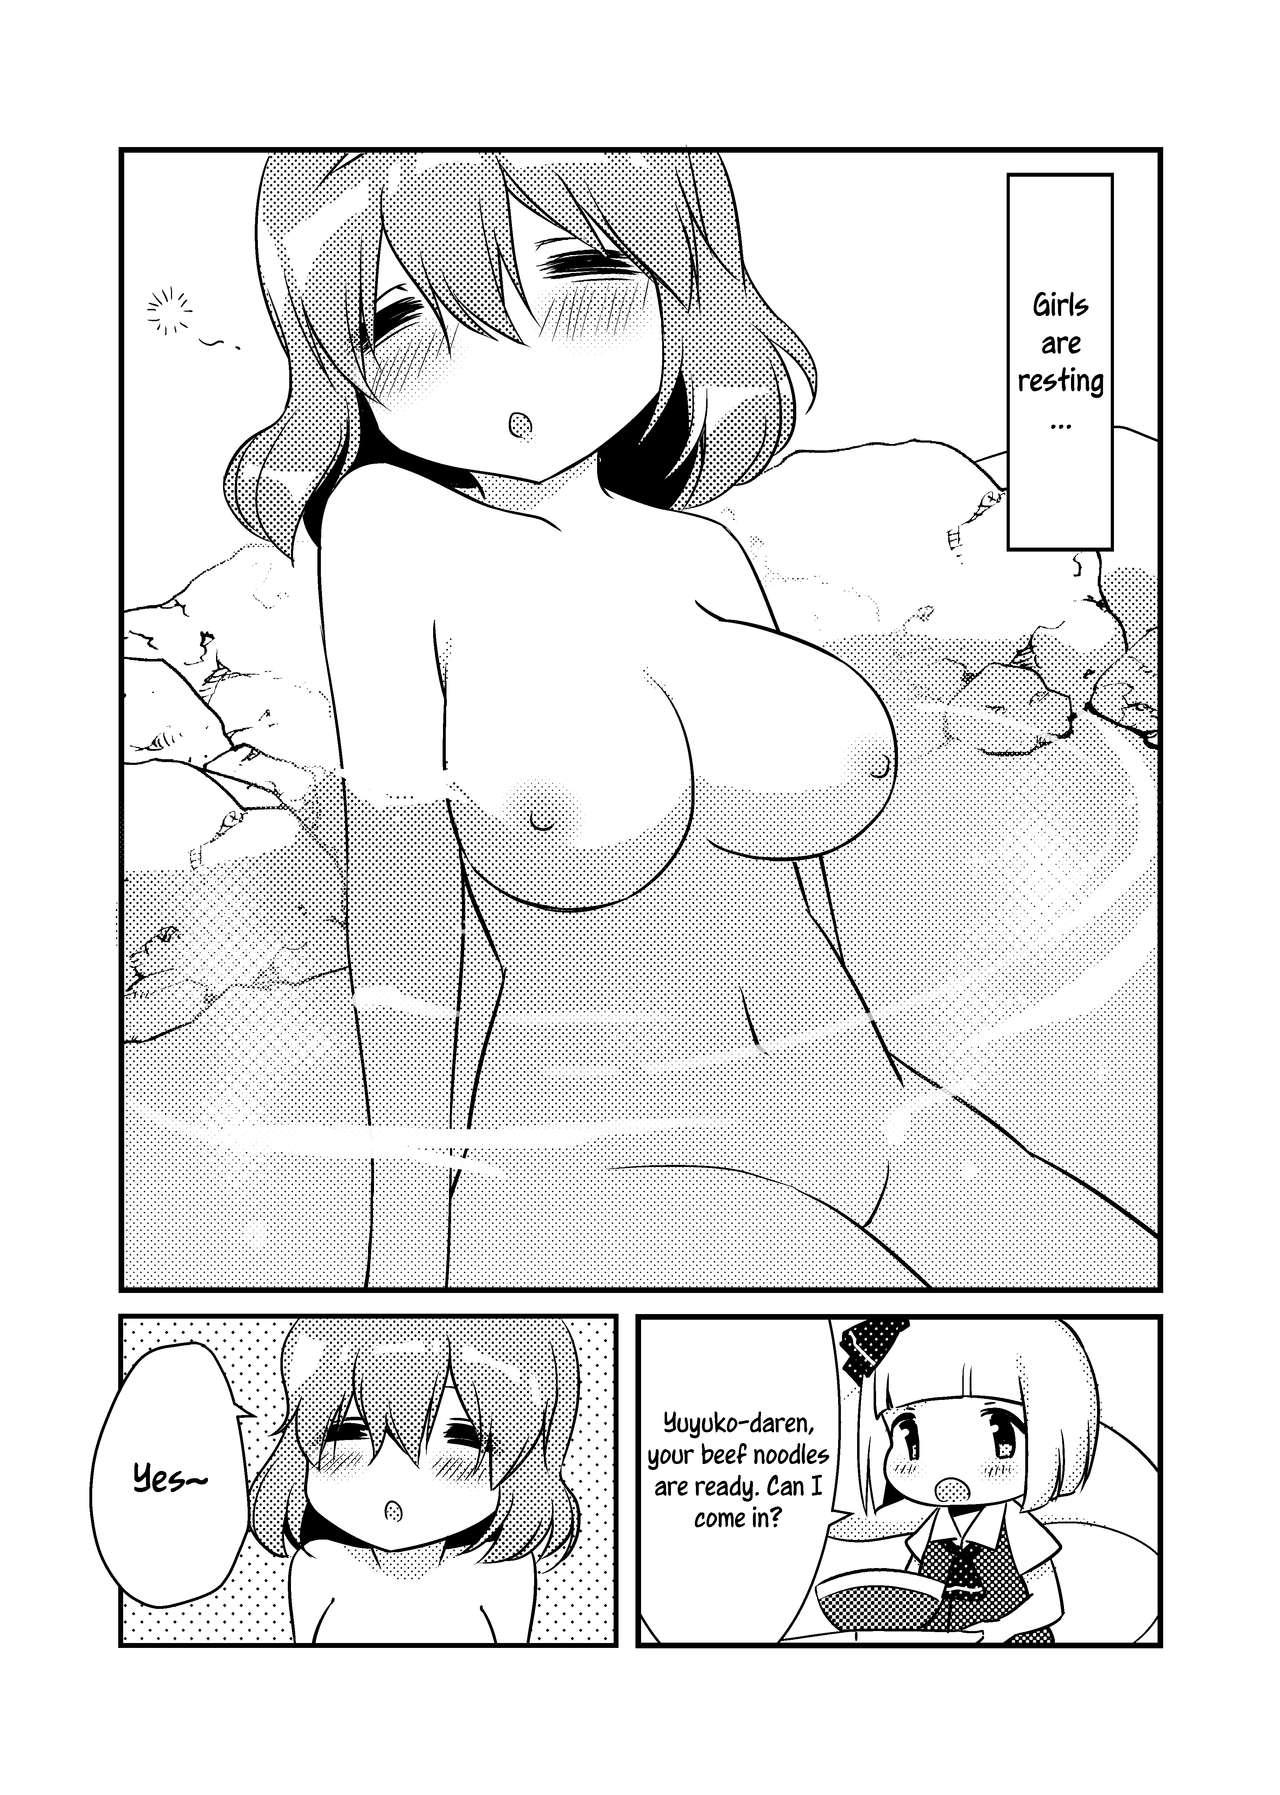 Dyke ????一起泡温泉吧！ | ????Let's Soak in the Hot Spring! - Touhou project Abuse - Page 3